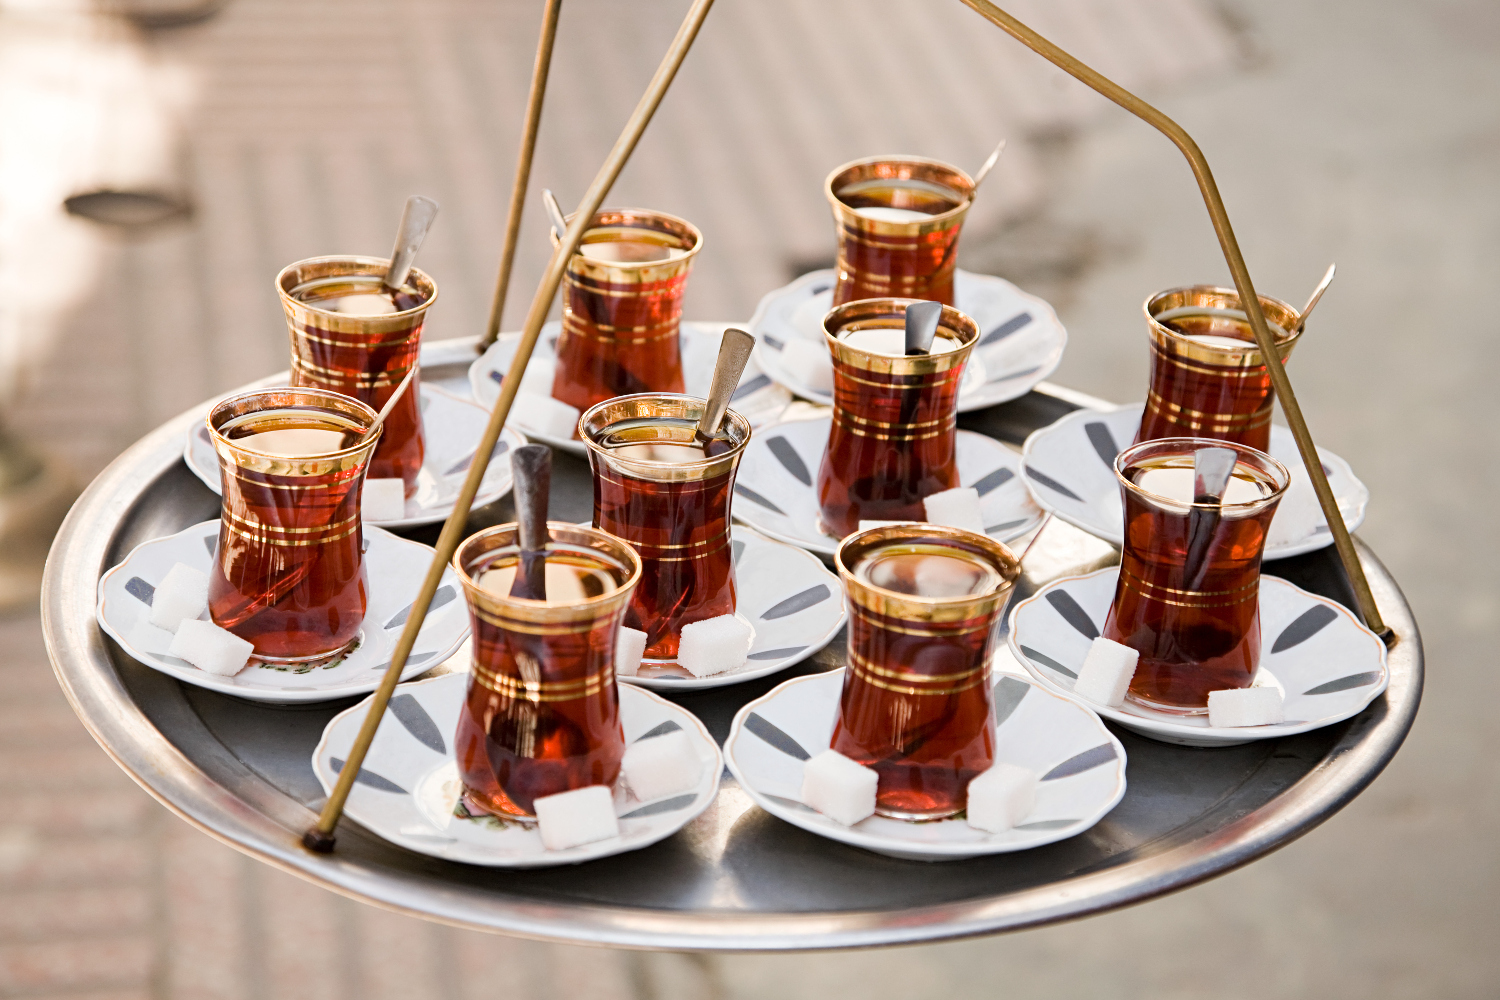 Wash down the Bazaar District's traditional dishes with a shot of apple tea. Image by Image Source / Getty